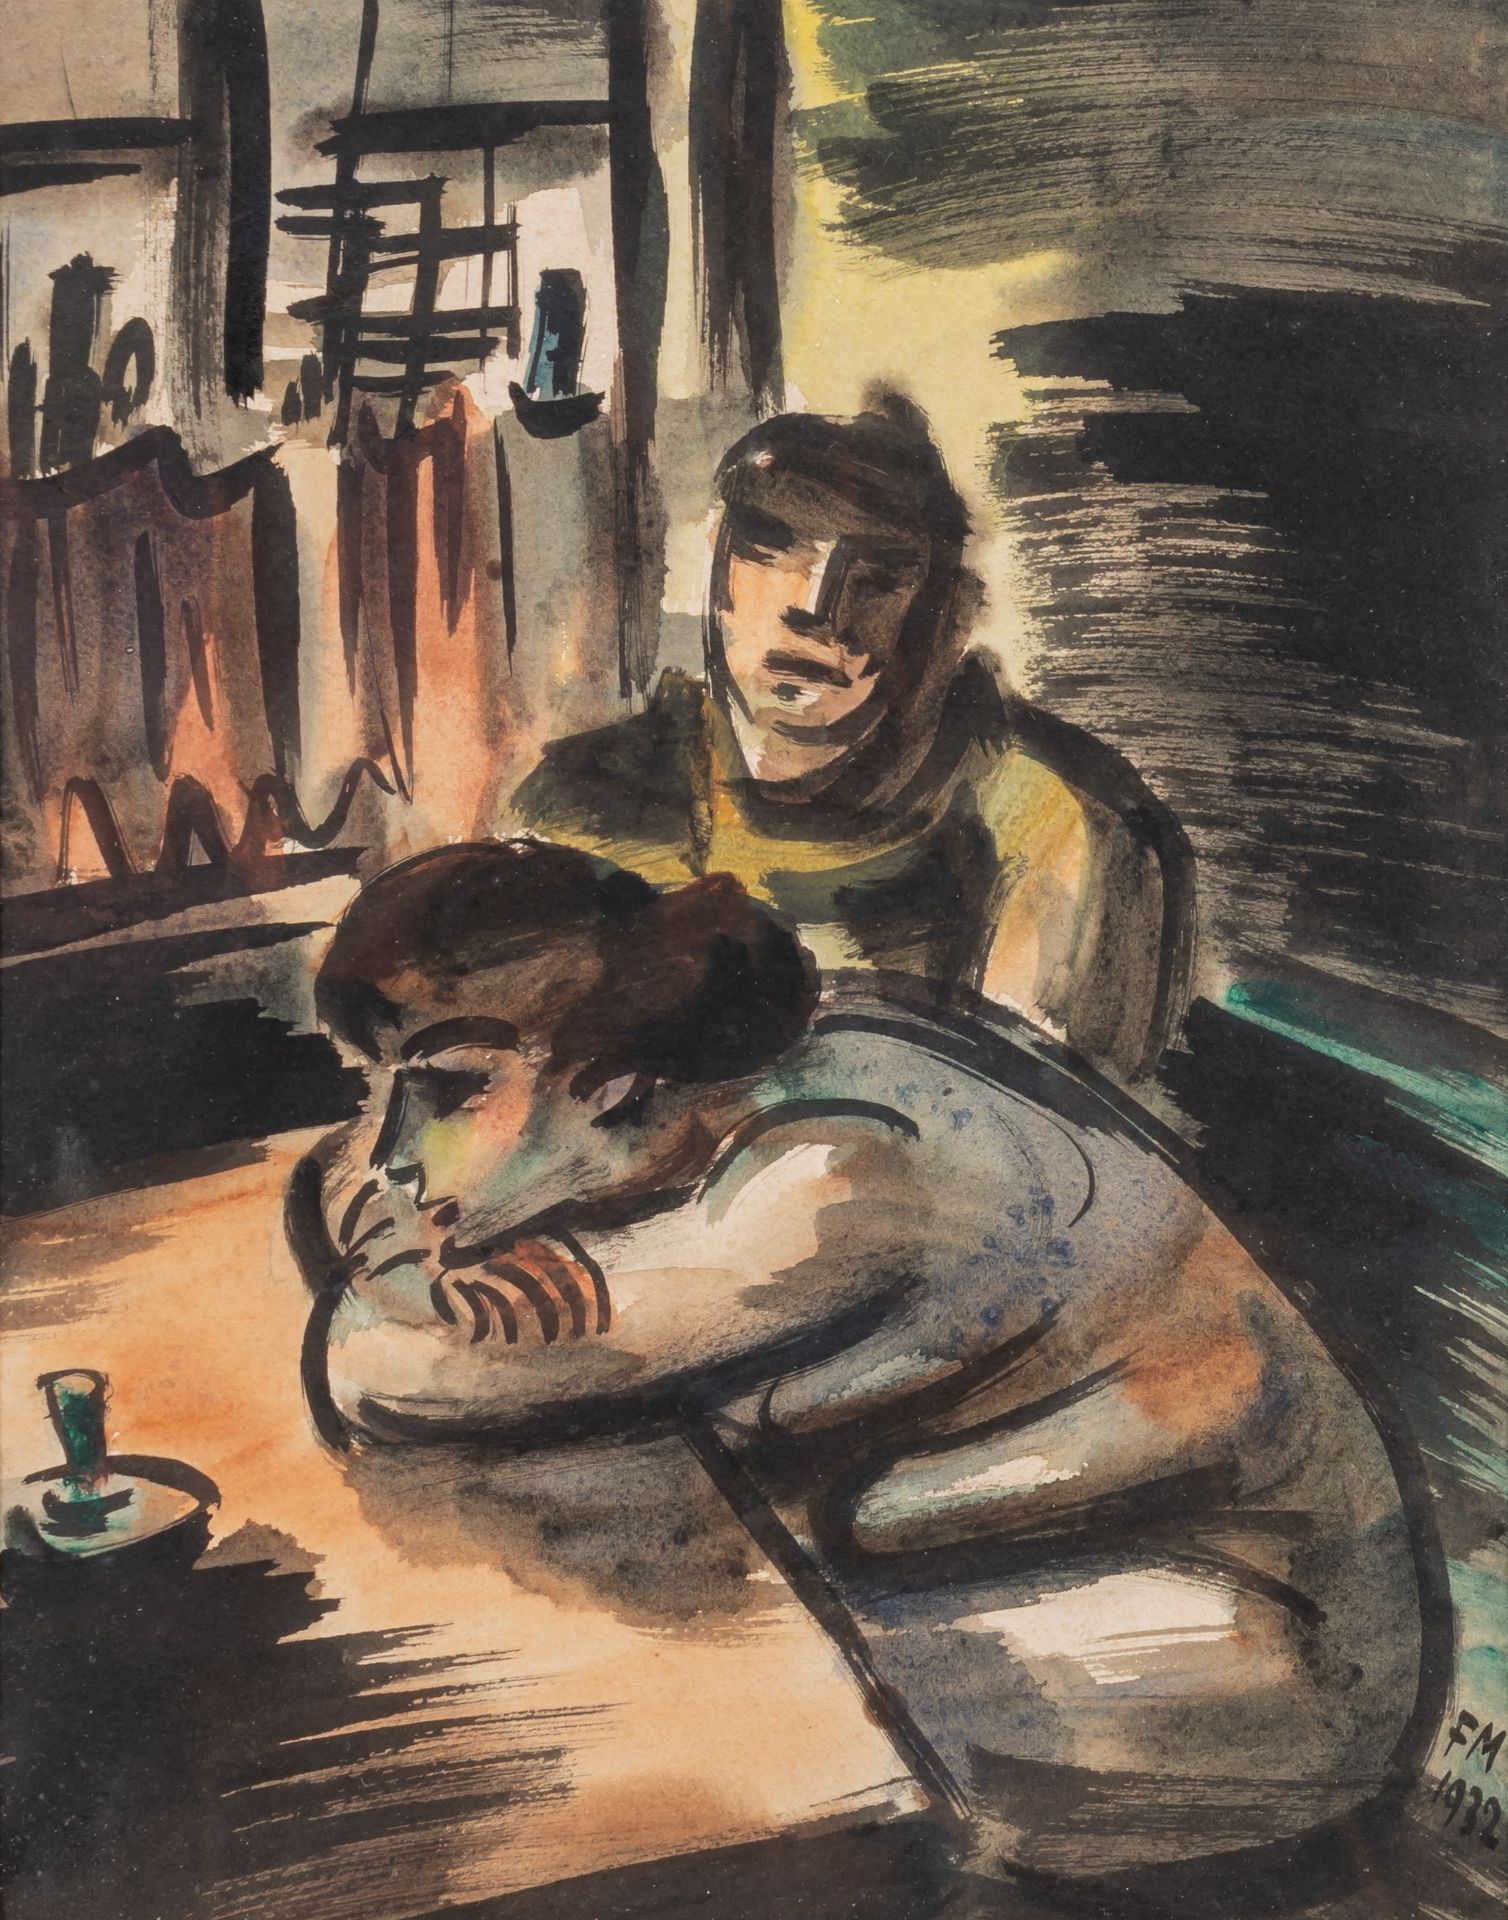 Frans Masereel (1889-1972), cafe scene, 1932, ink and watercolour on paper, 24 x 31 cm